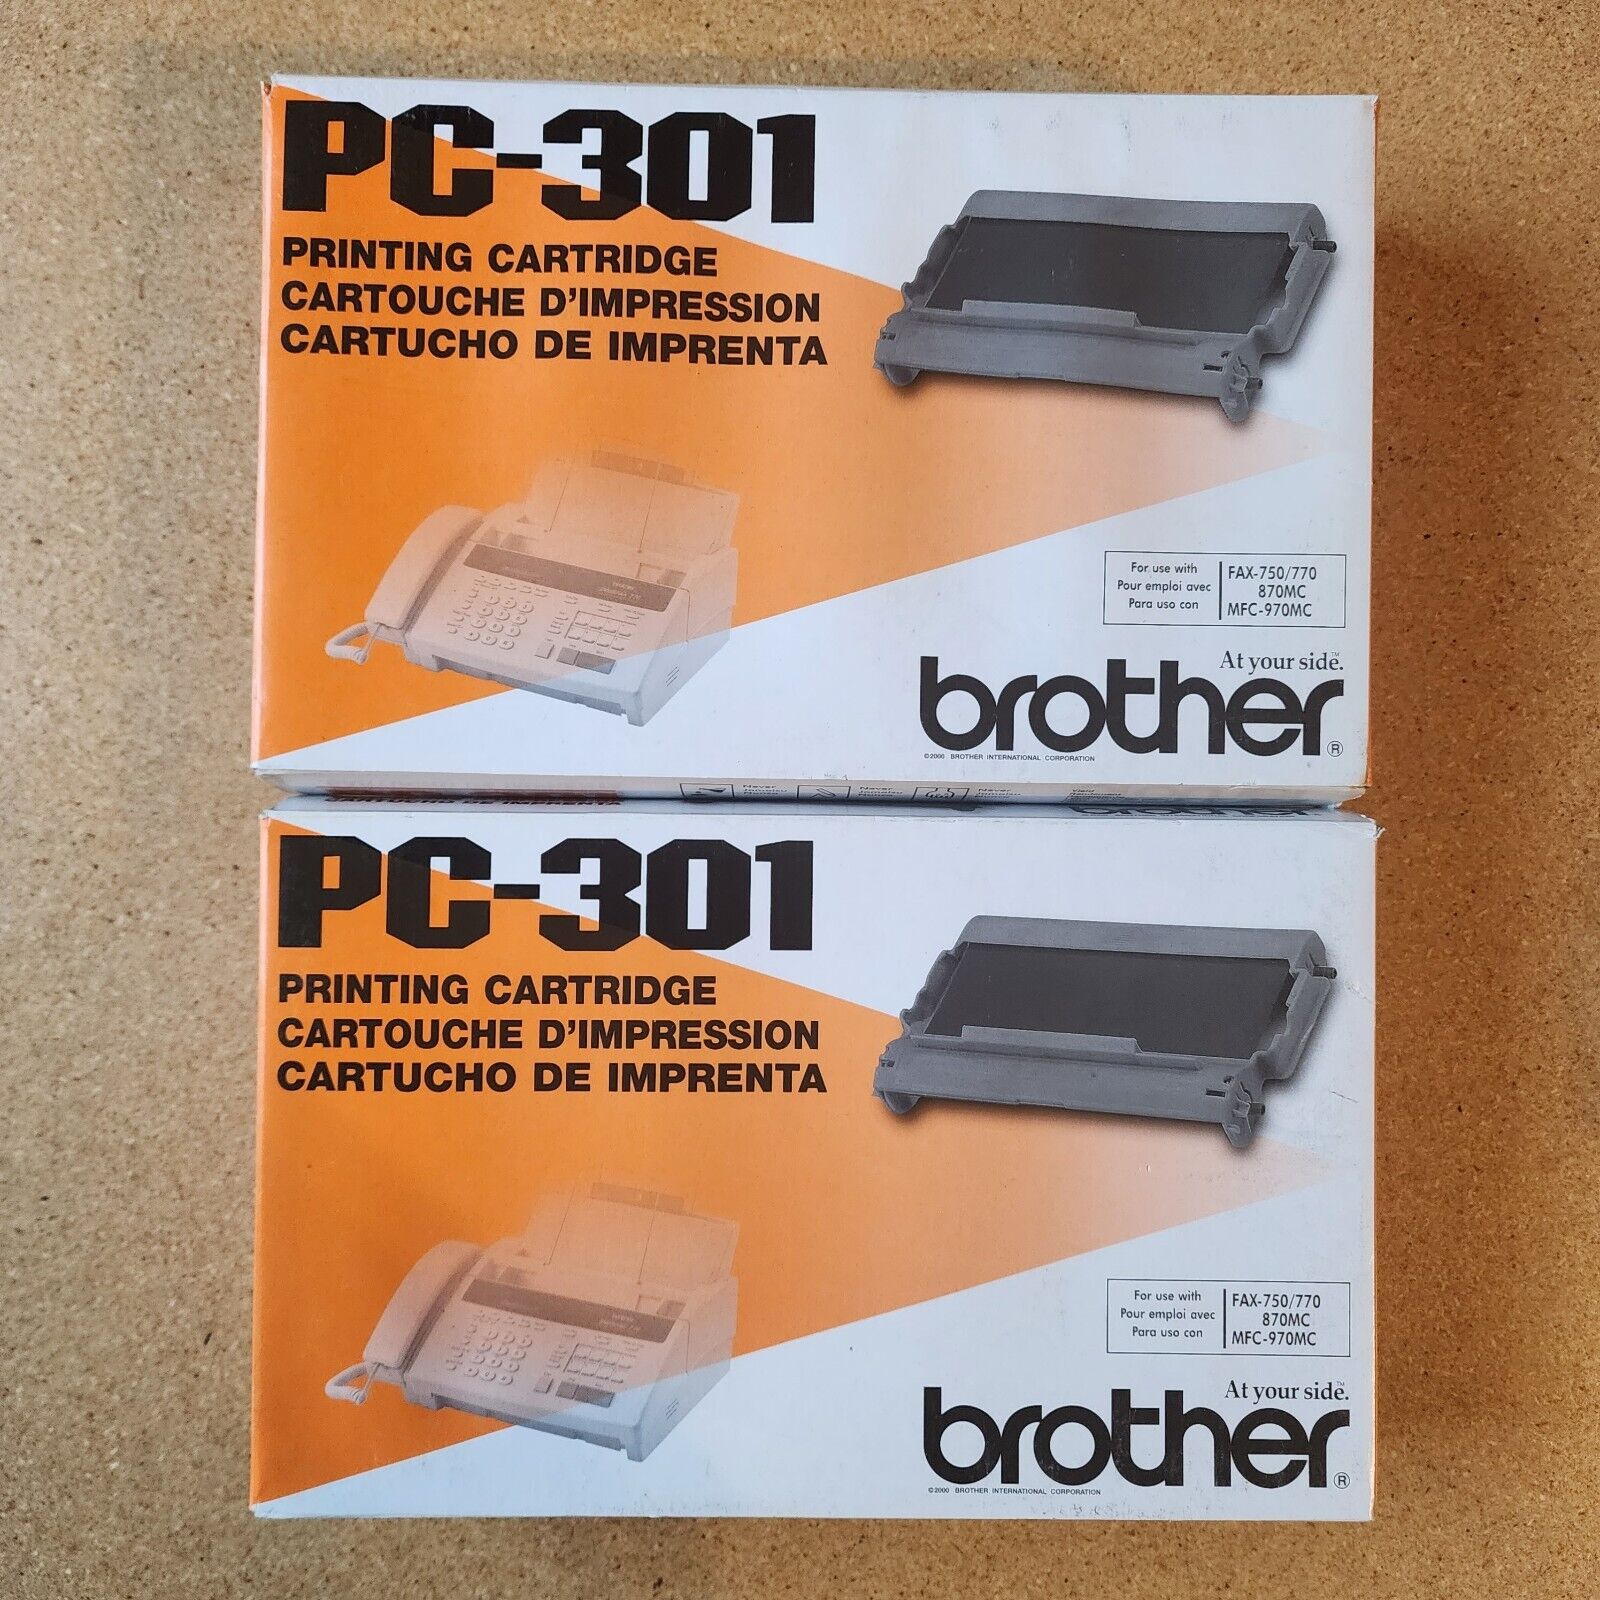 2x Brother PC-301 Genuine OEM Fax Printing Cartridge- Two Pack, 